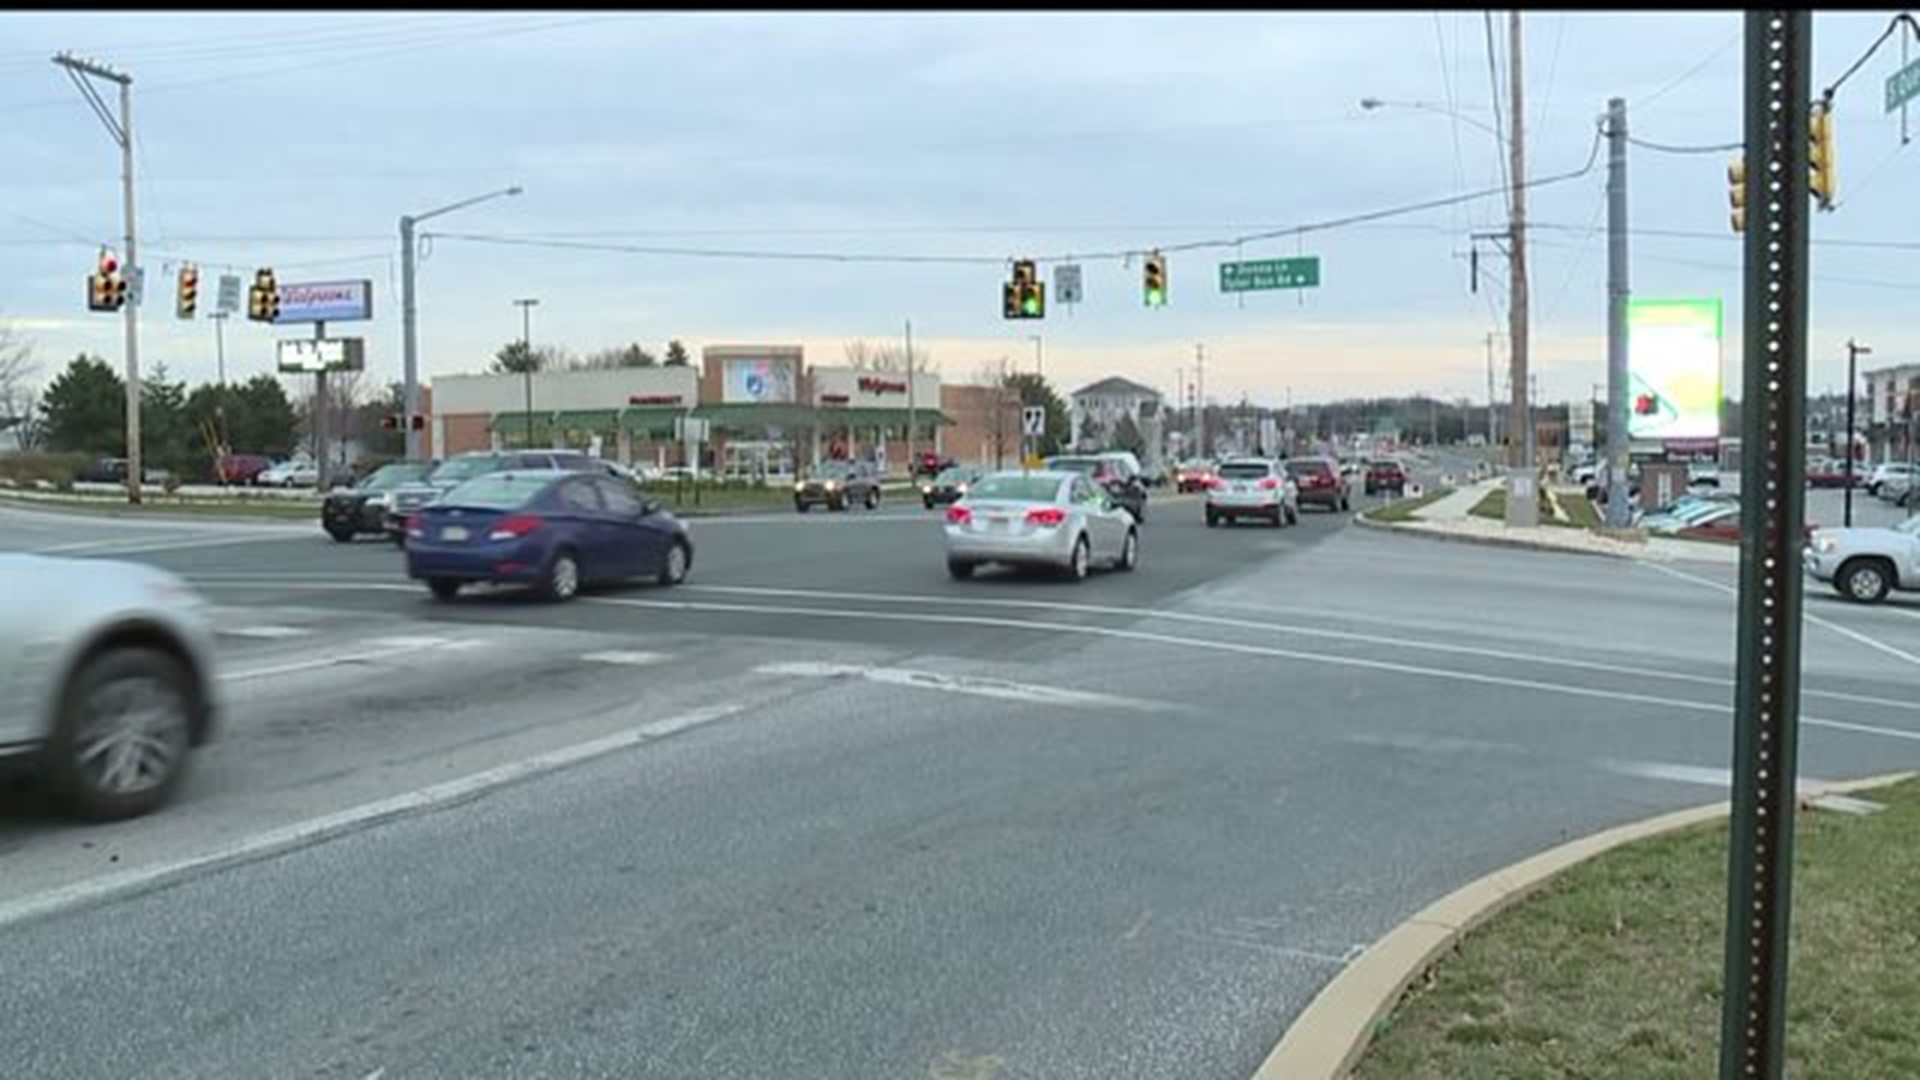 Thirteen intersections in York Co. with heavy congestion may get improvements